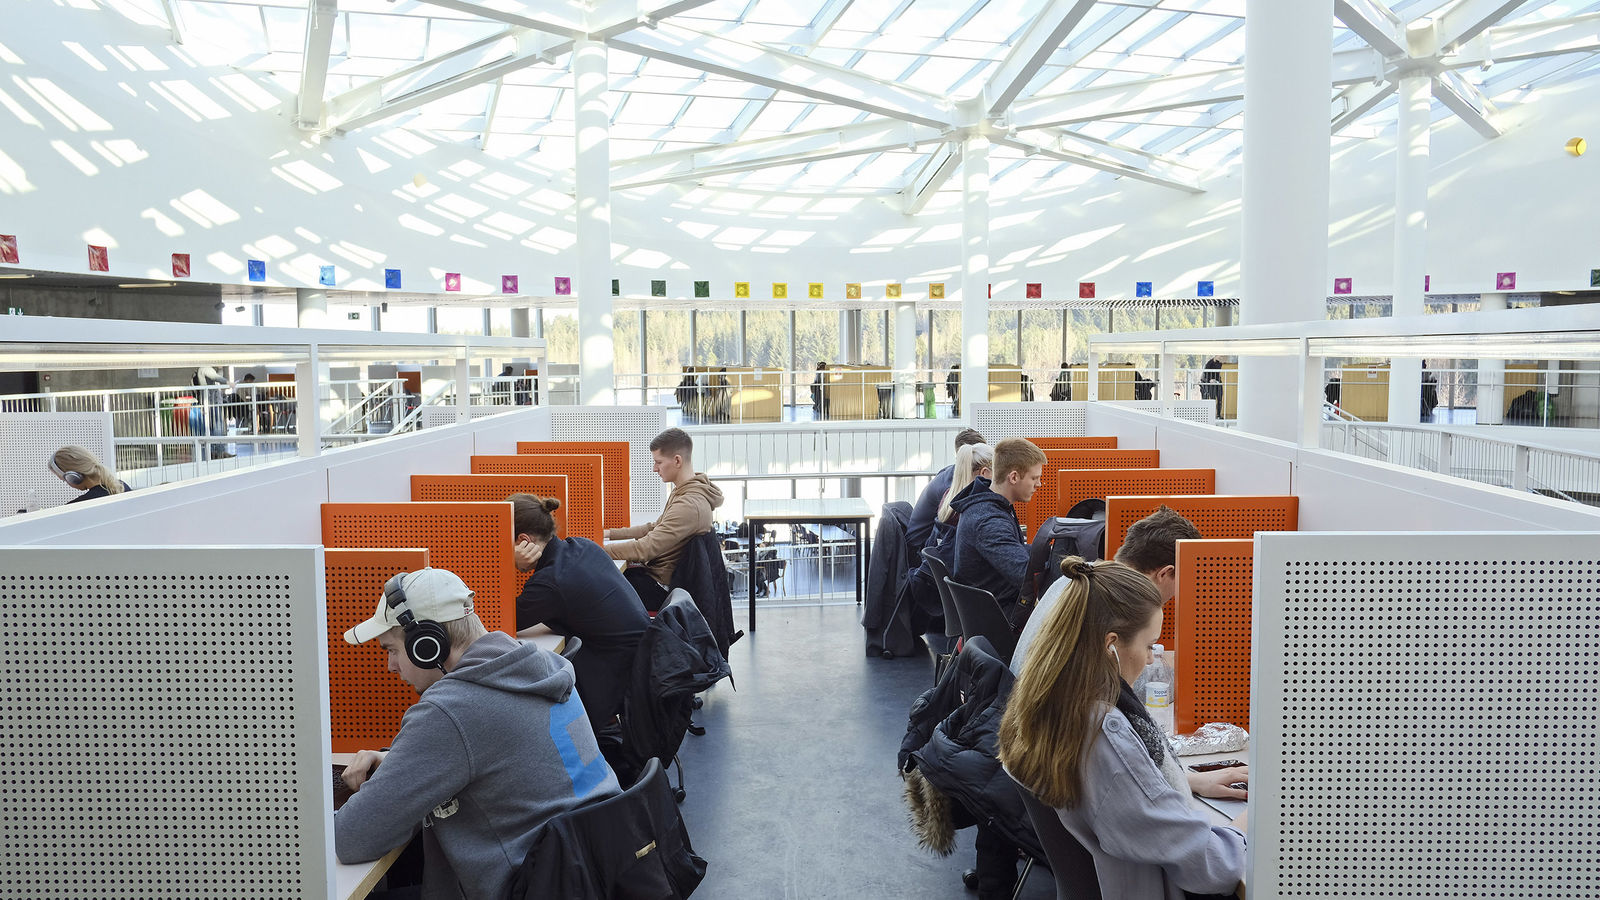 Students study at reading booths in Sólinni